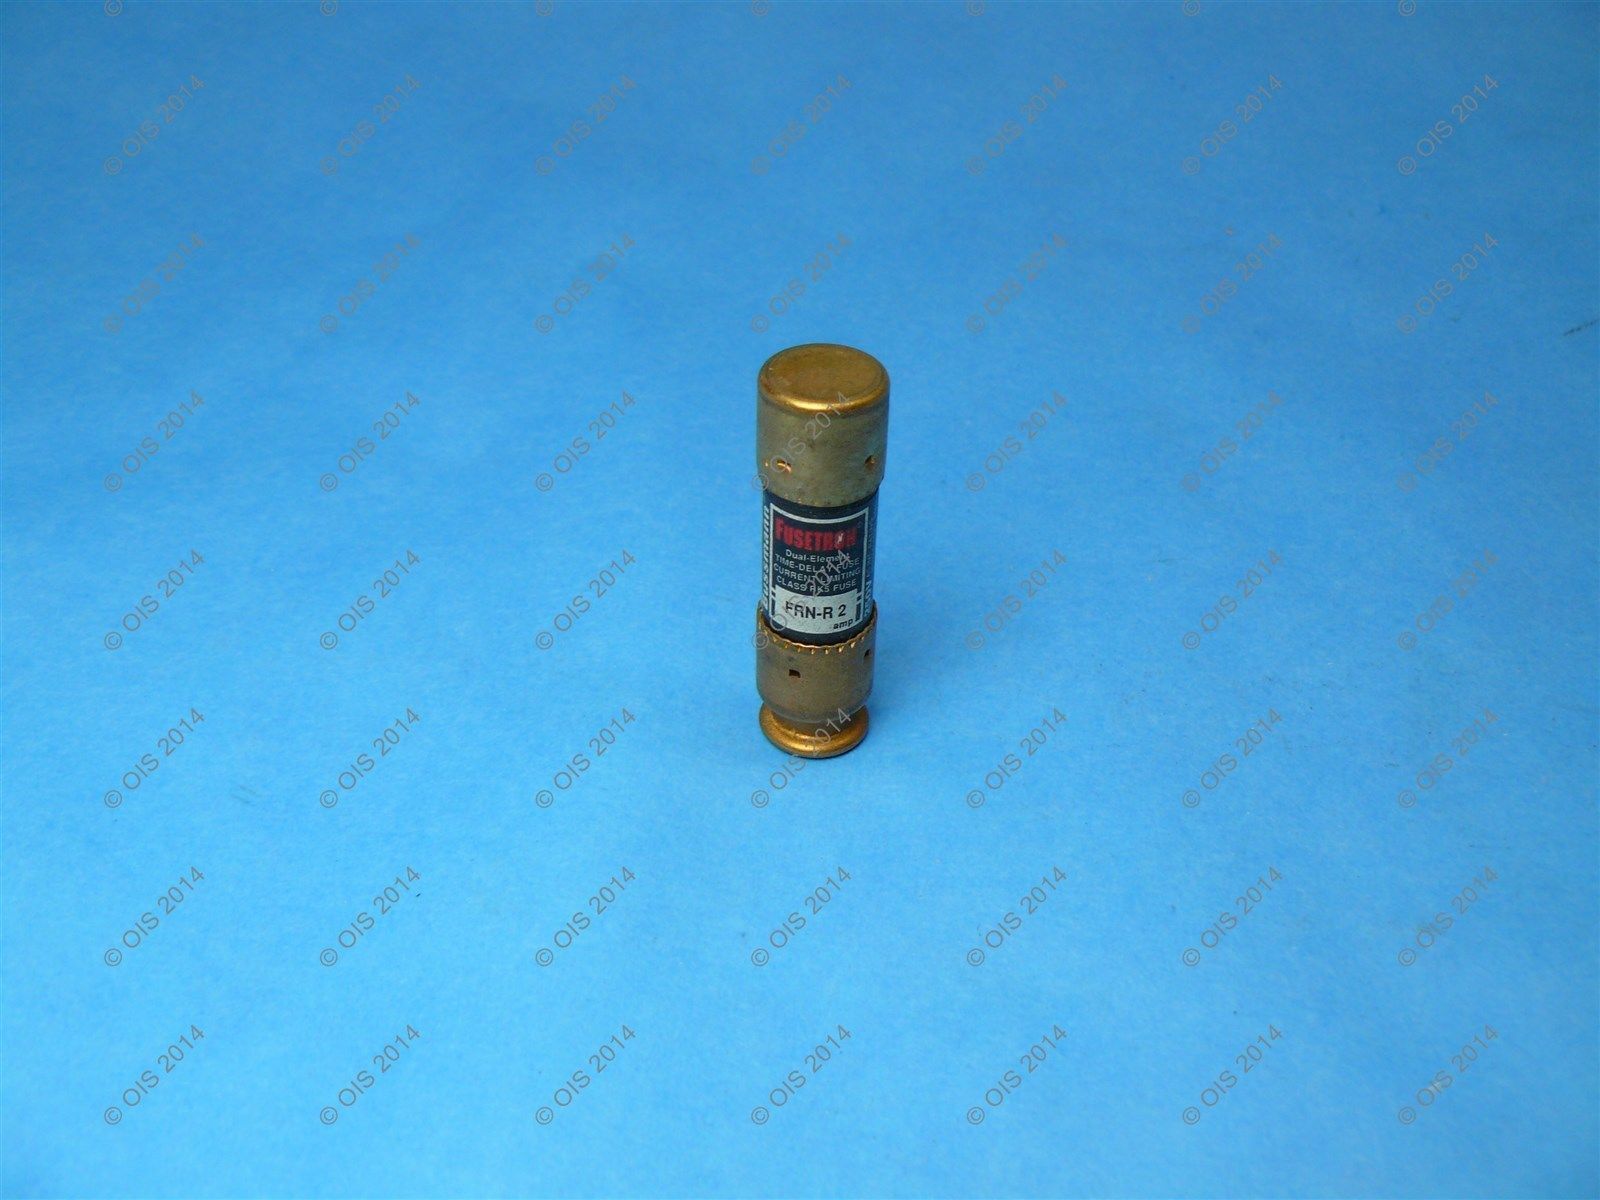 Primary image for Bussmann FRN-R-2 Time-delay Fuse Class RK5 2 Amps 250 VAC/125 VDC Tested